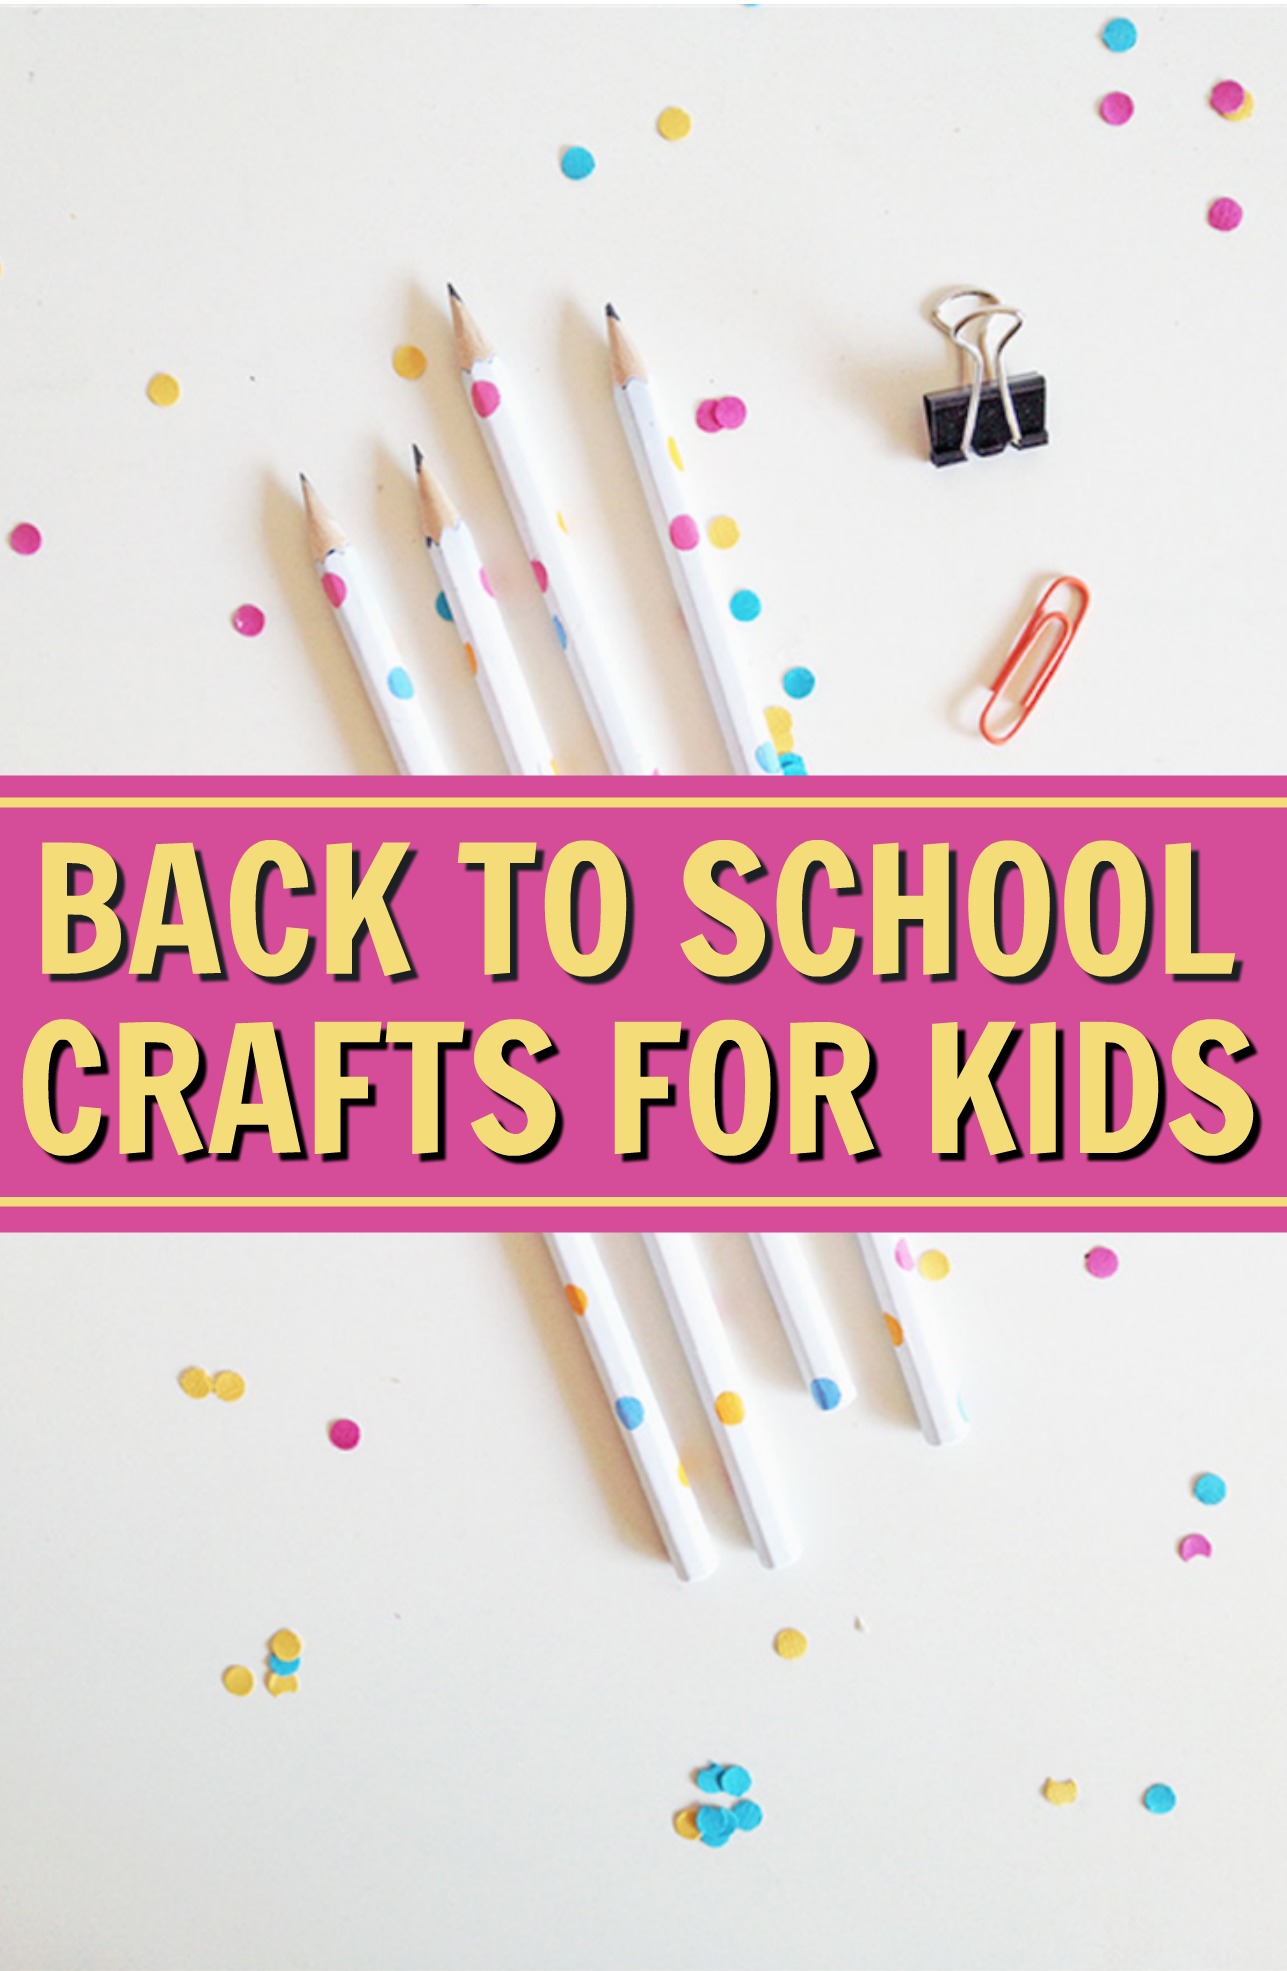 back to school, back to school kids crafts, back to school craft ideas for kids, back to school DIY, back to school projects